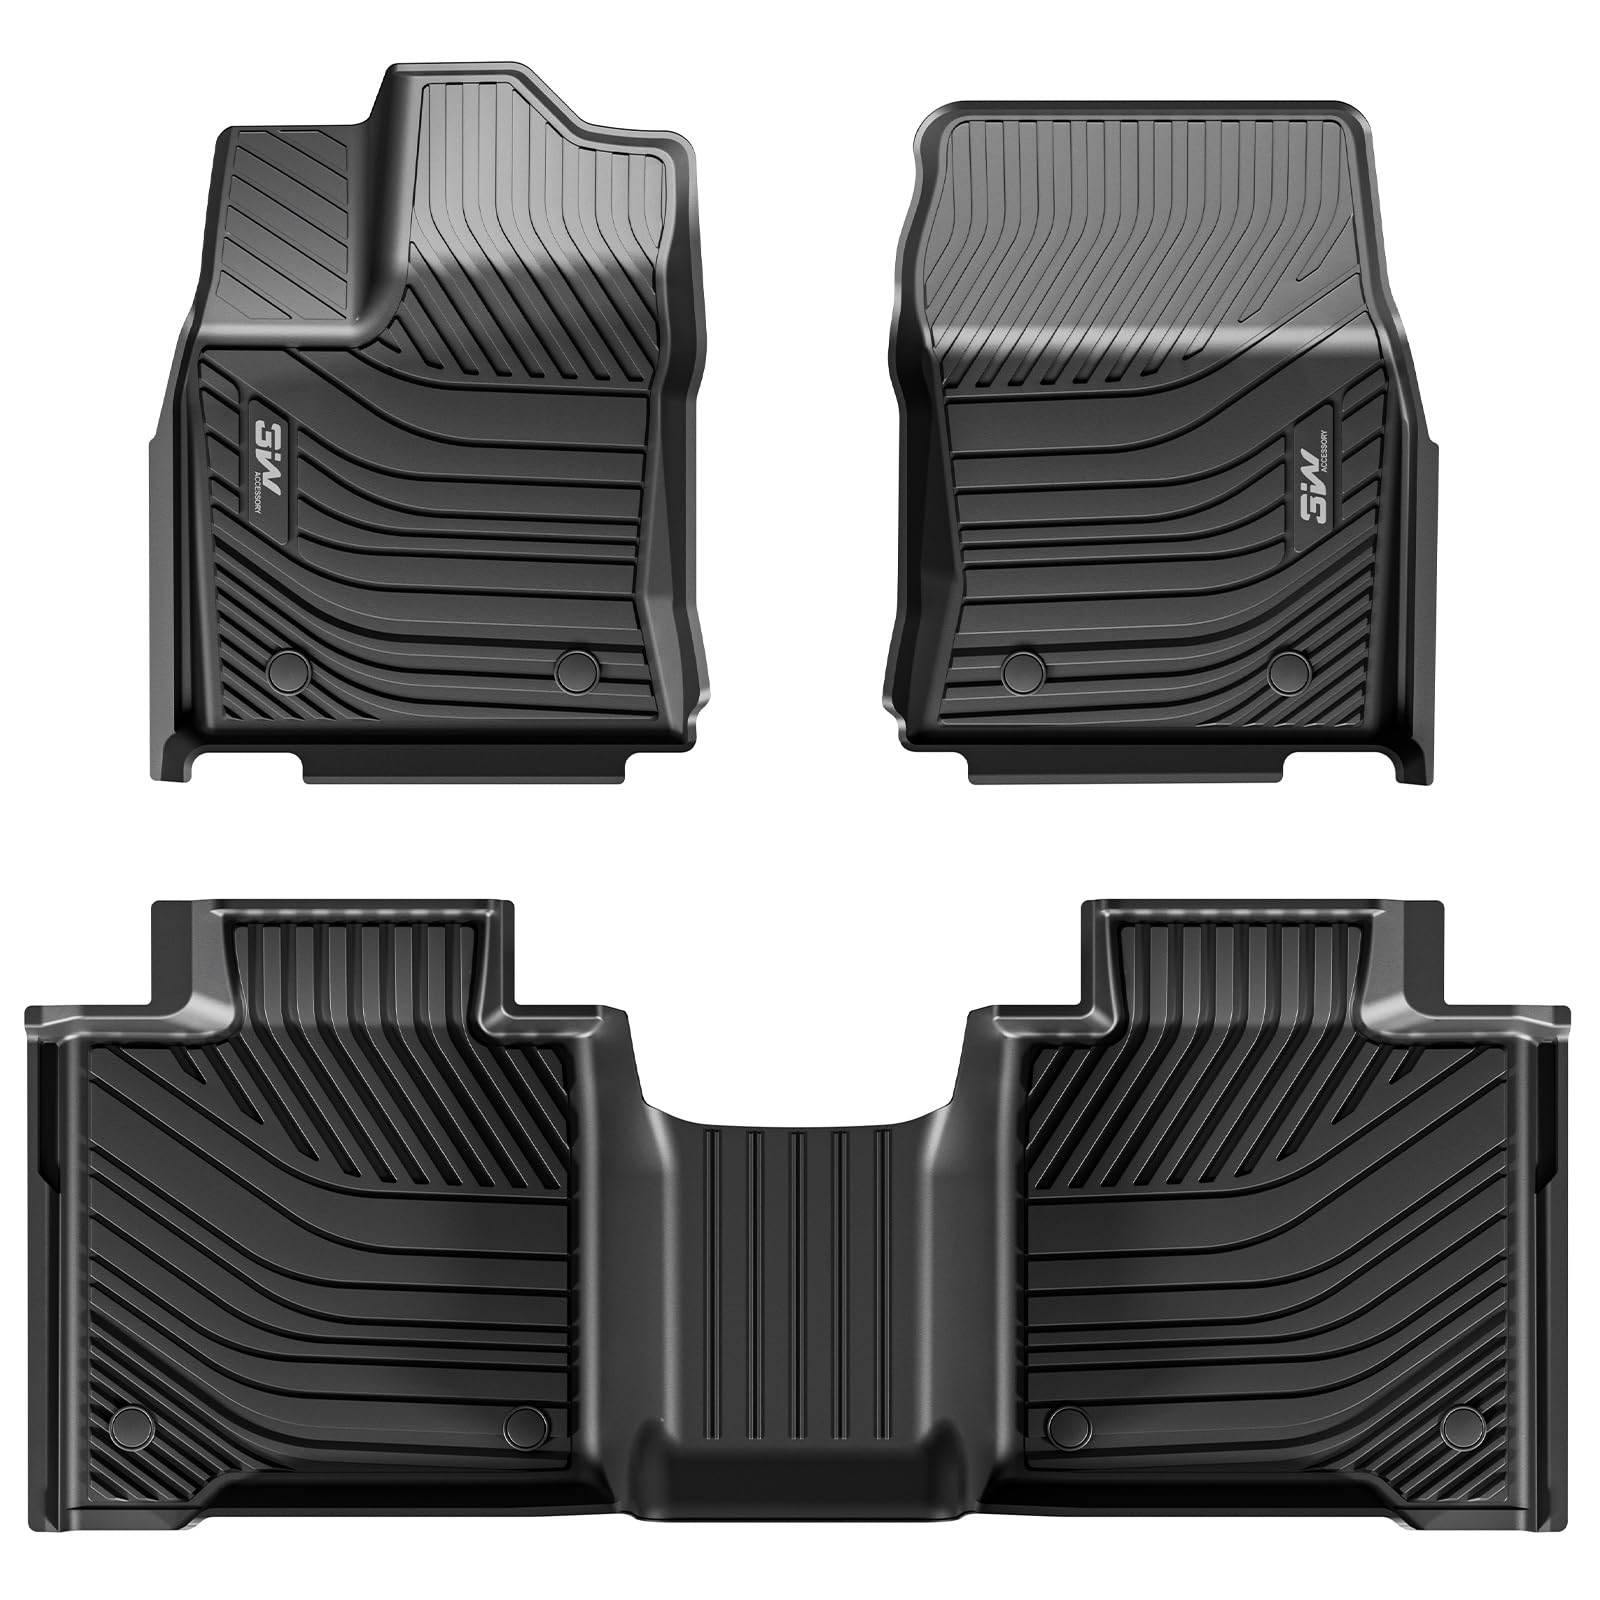 3W Toyota Tundra 2022-2024 Custom Floor Mats CrewMax Cab Only TPE Material & All-Weather Protection Vehicles & Parts 3Wliners 2022-2023 Tundra 2022-2023 1st&2nd Row Mats